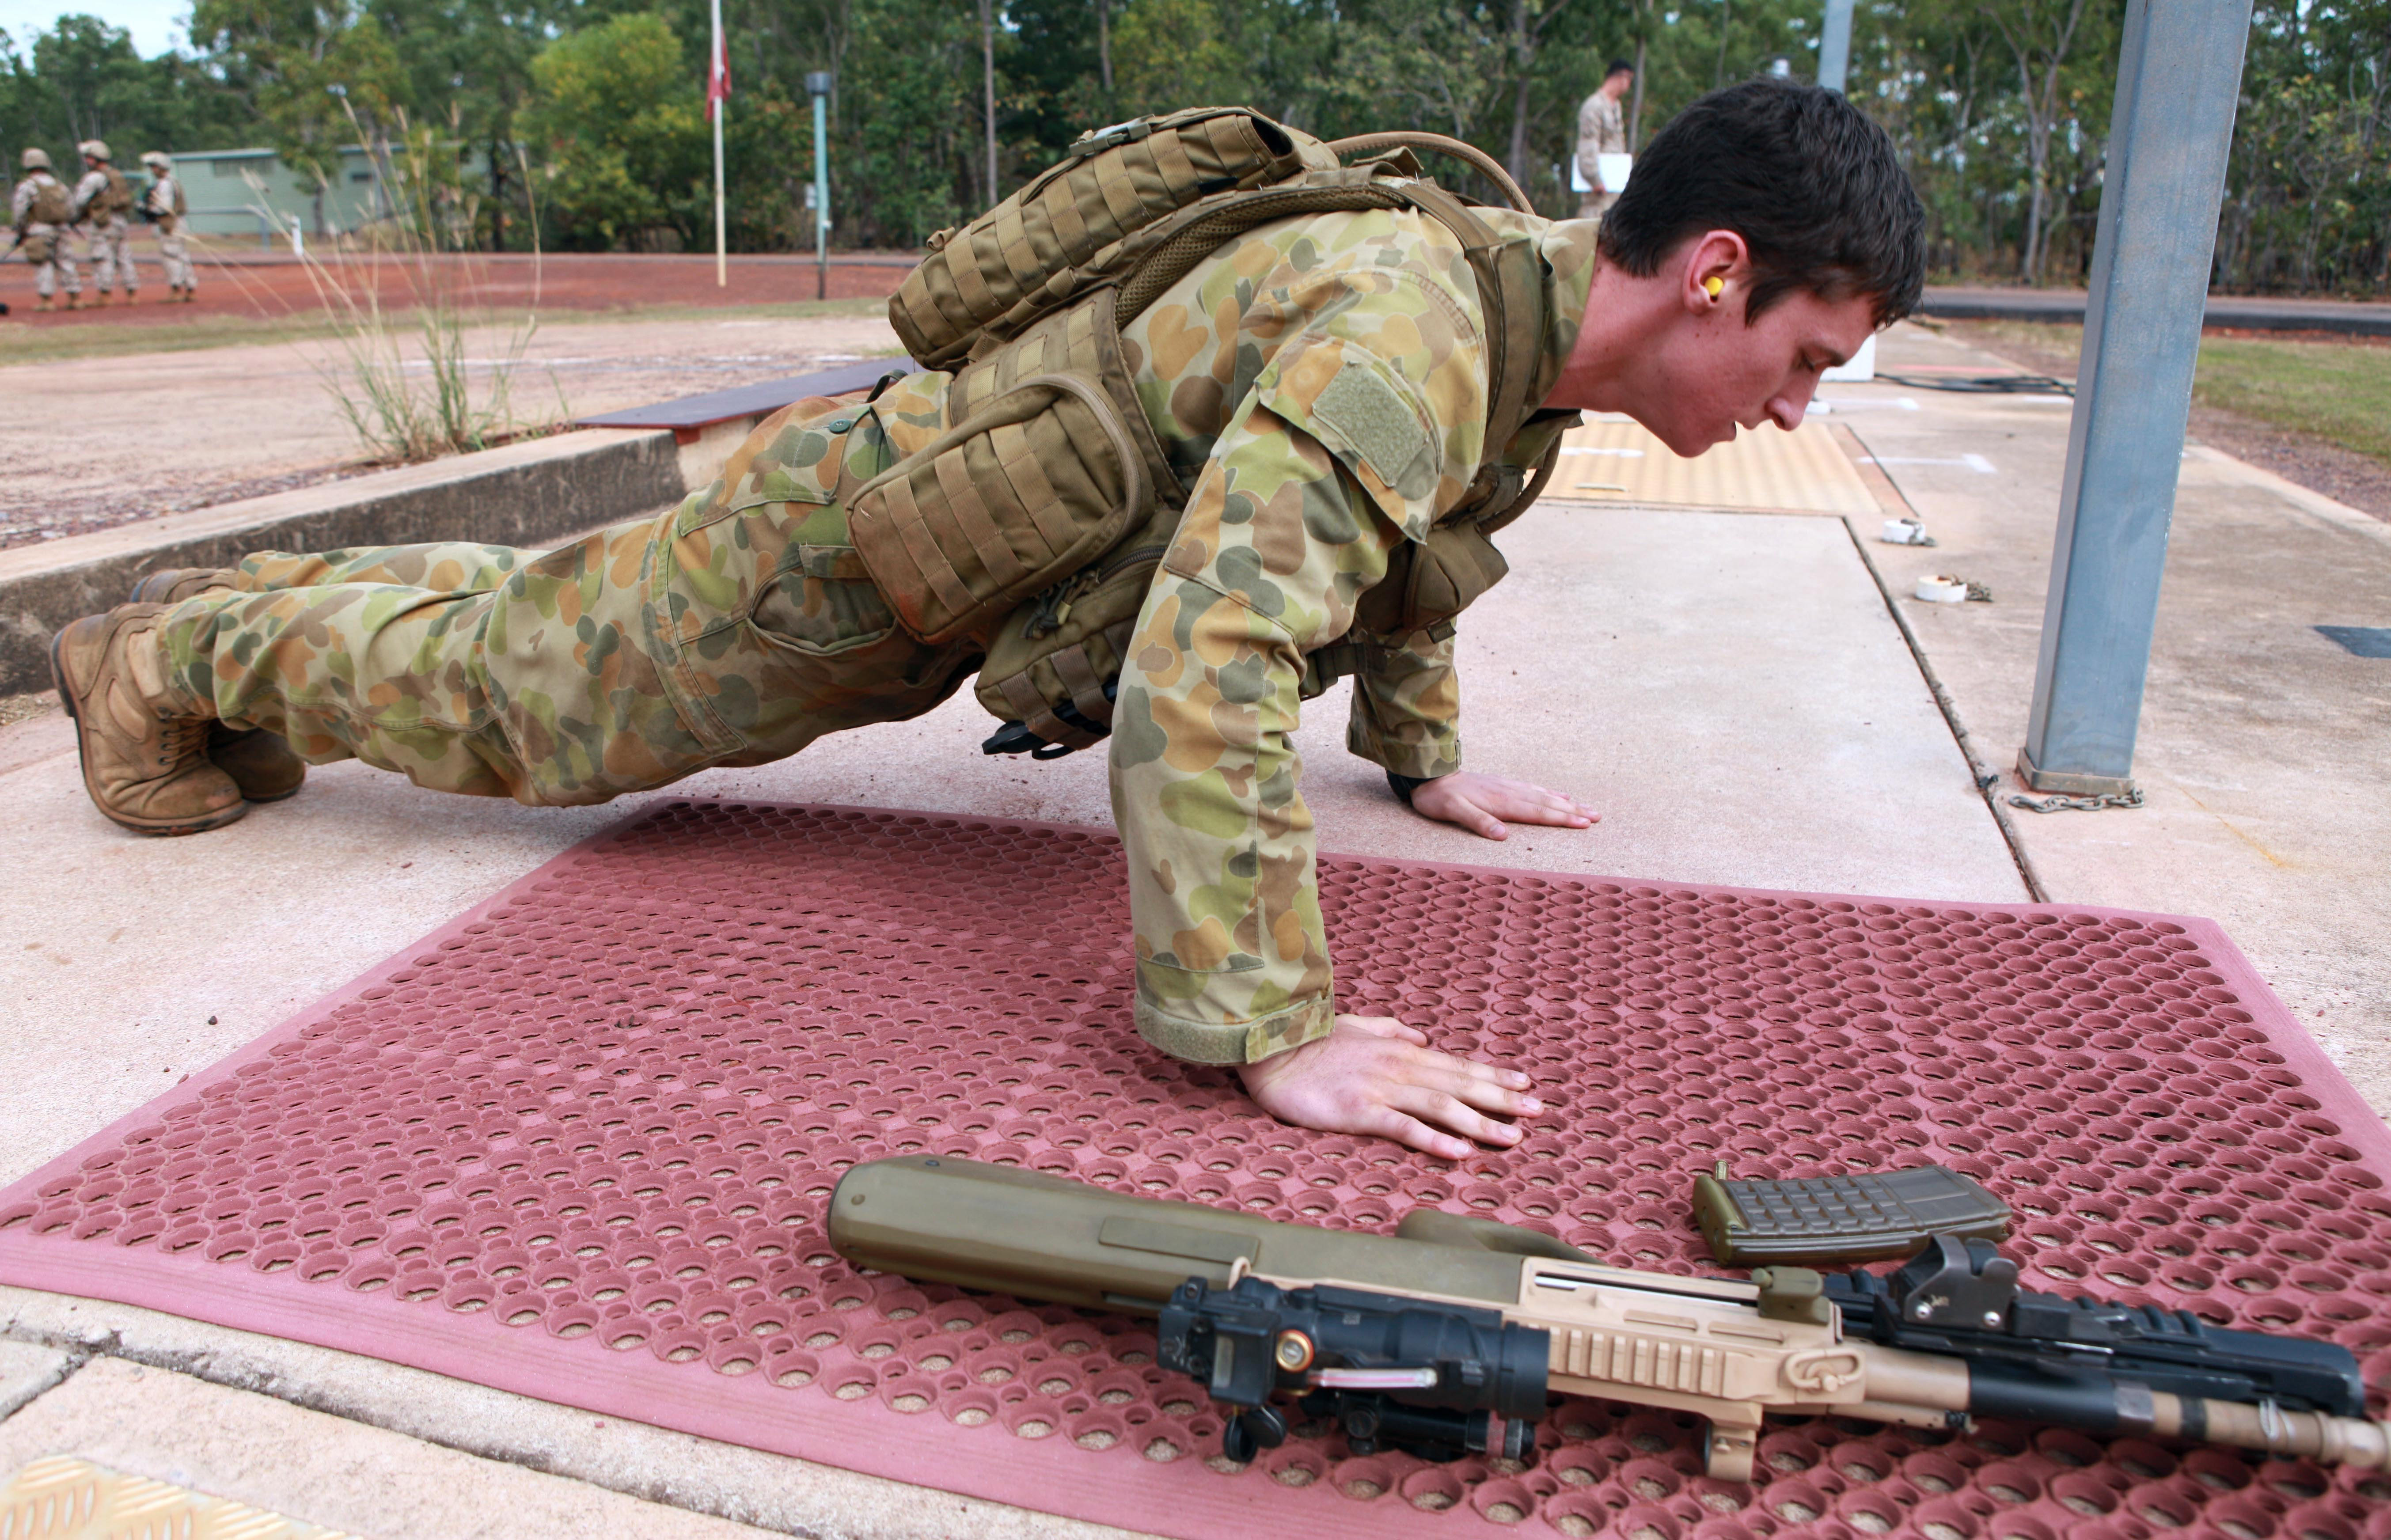 Australian army Pvt. Jake Budge push-ups before shooting target with an F88